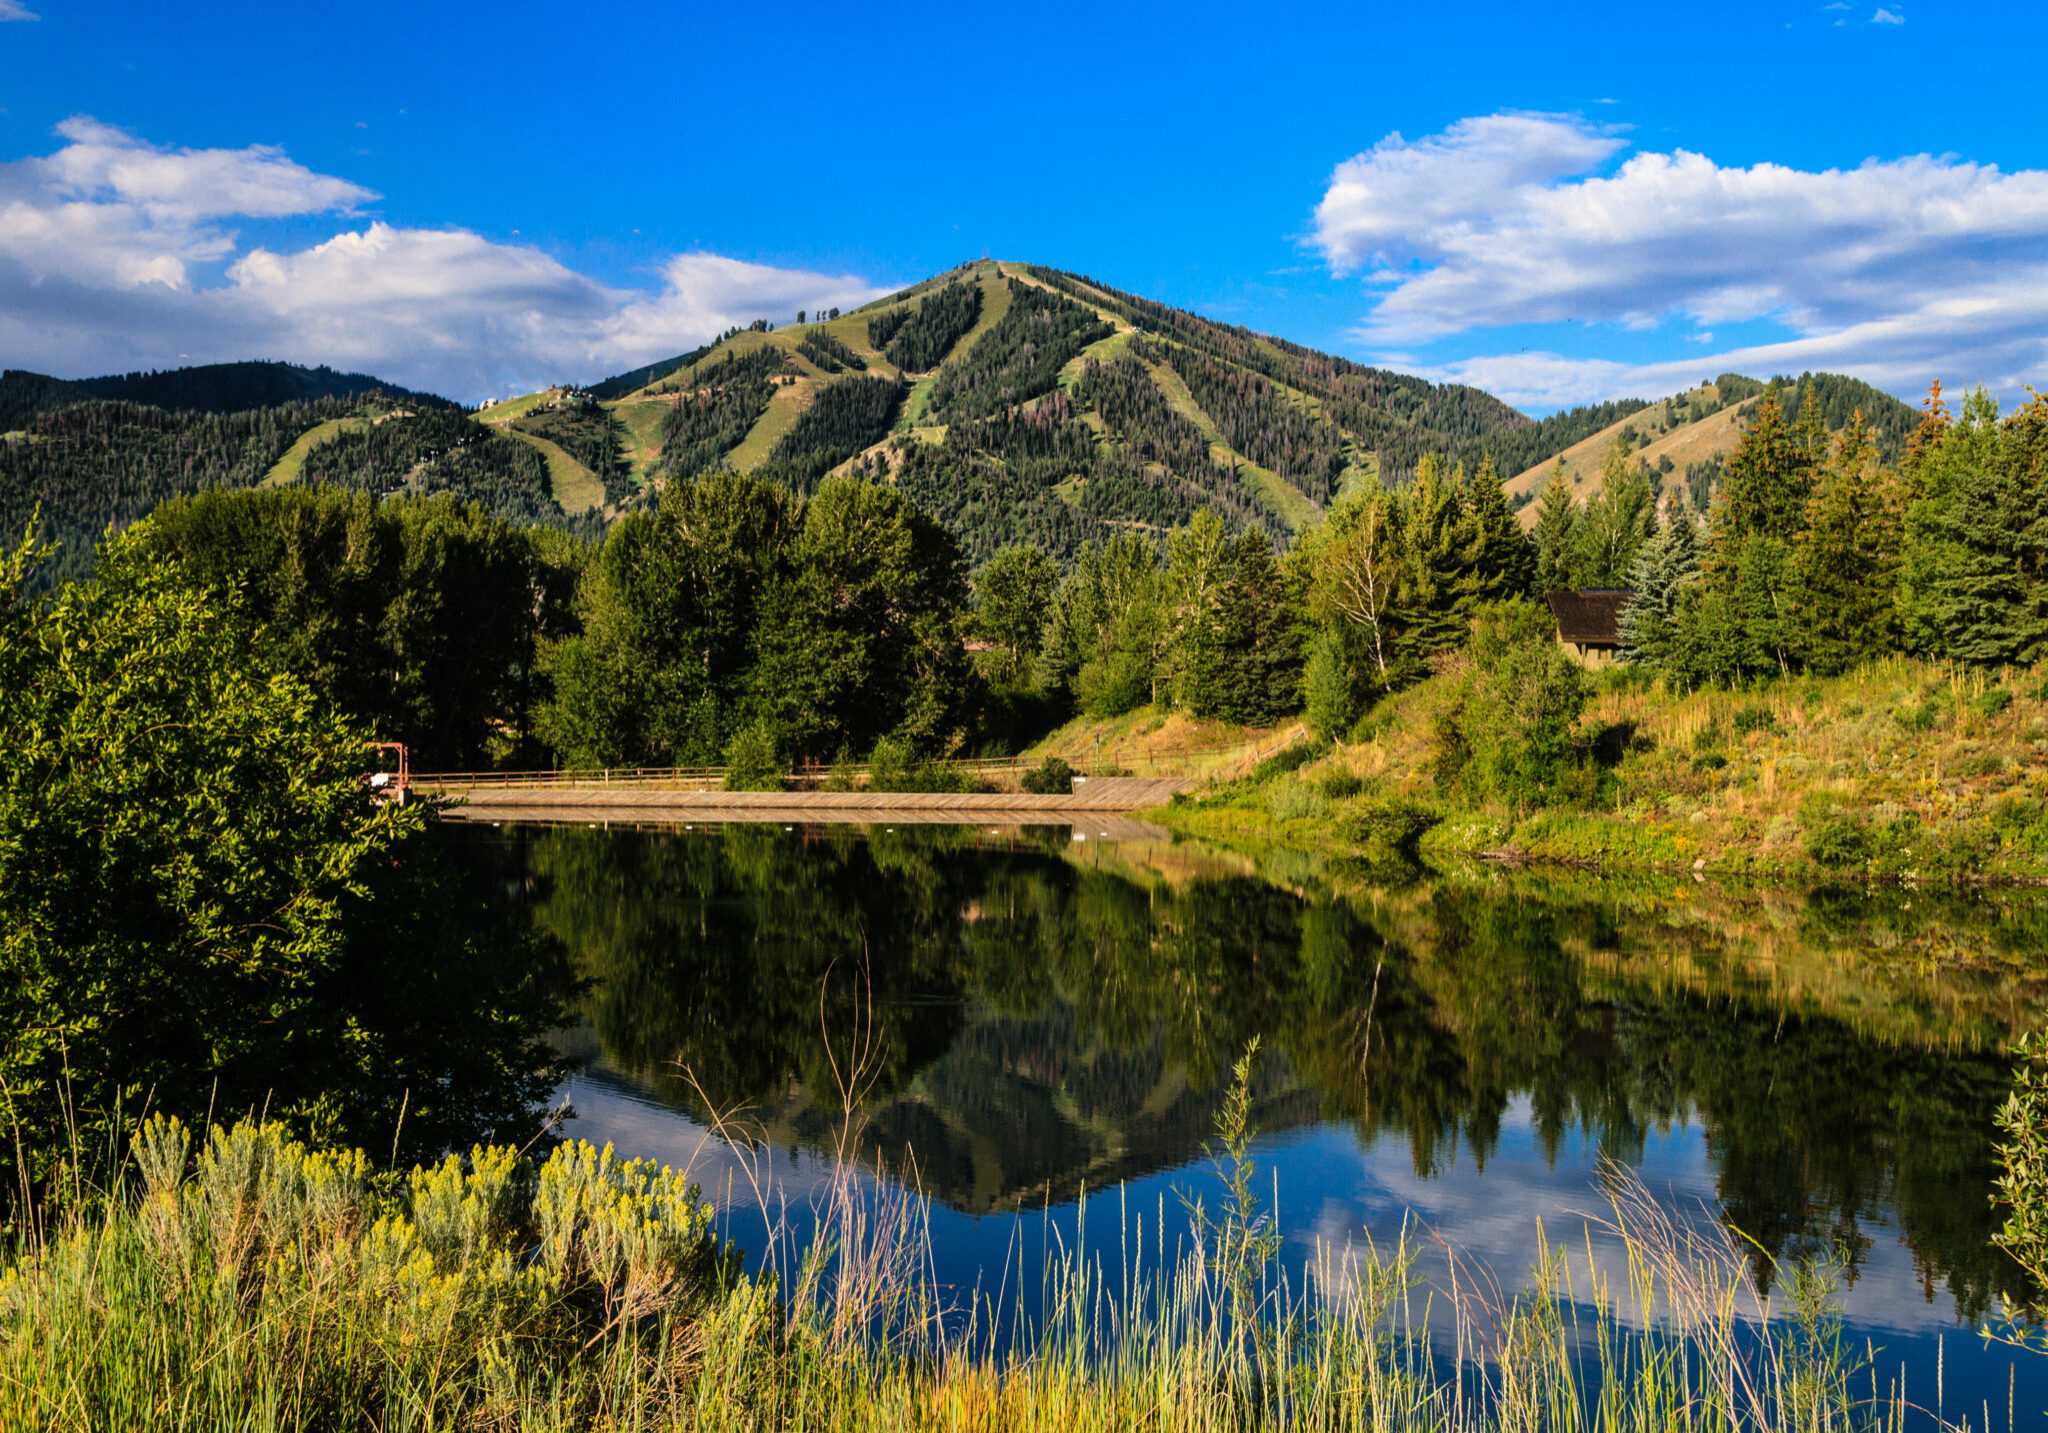 A summer view of Bald Mountain in Sun Valley, with reflection